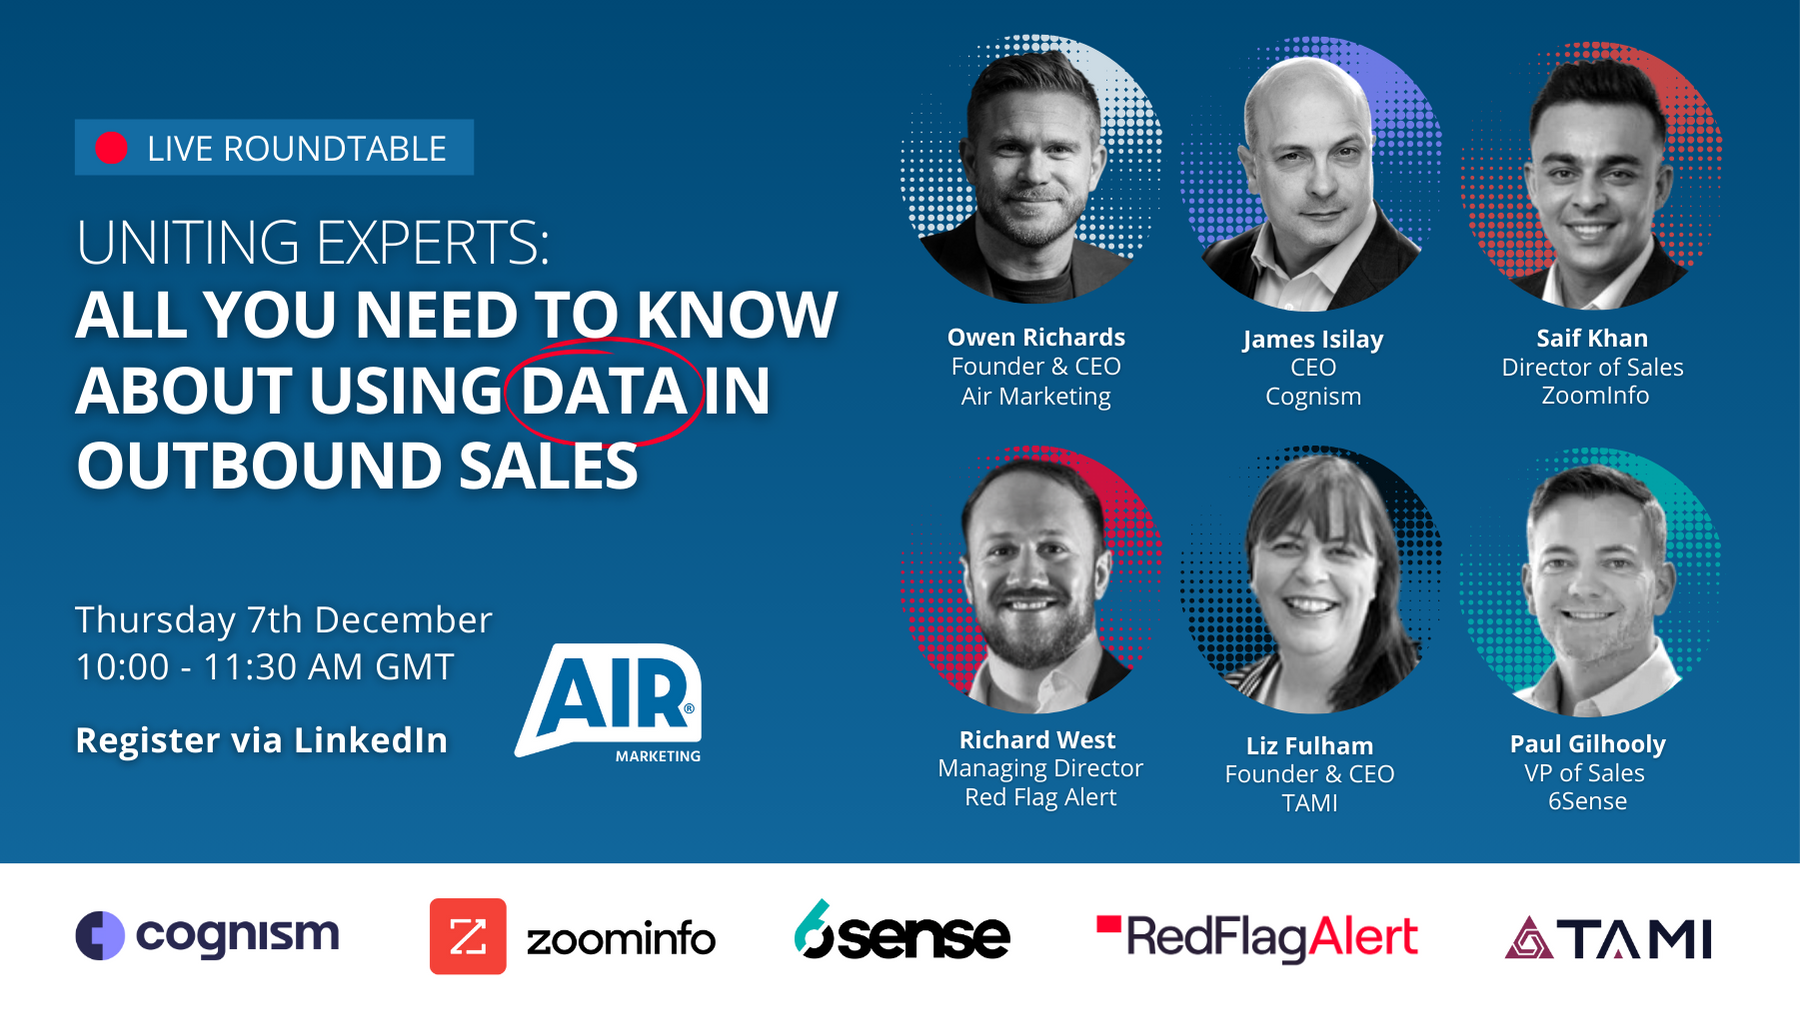 Uniting Experts: All You Need to Know About Using Data in Outbound Sales